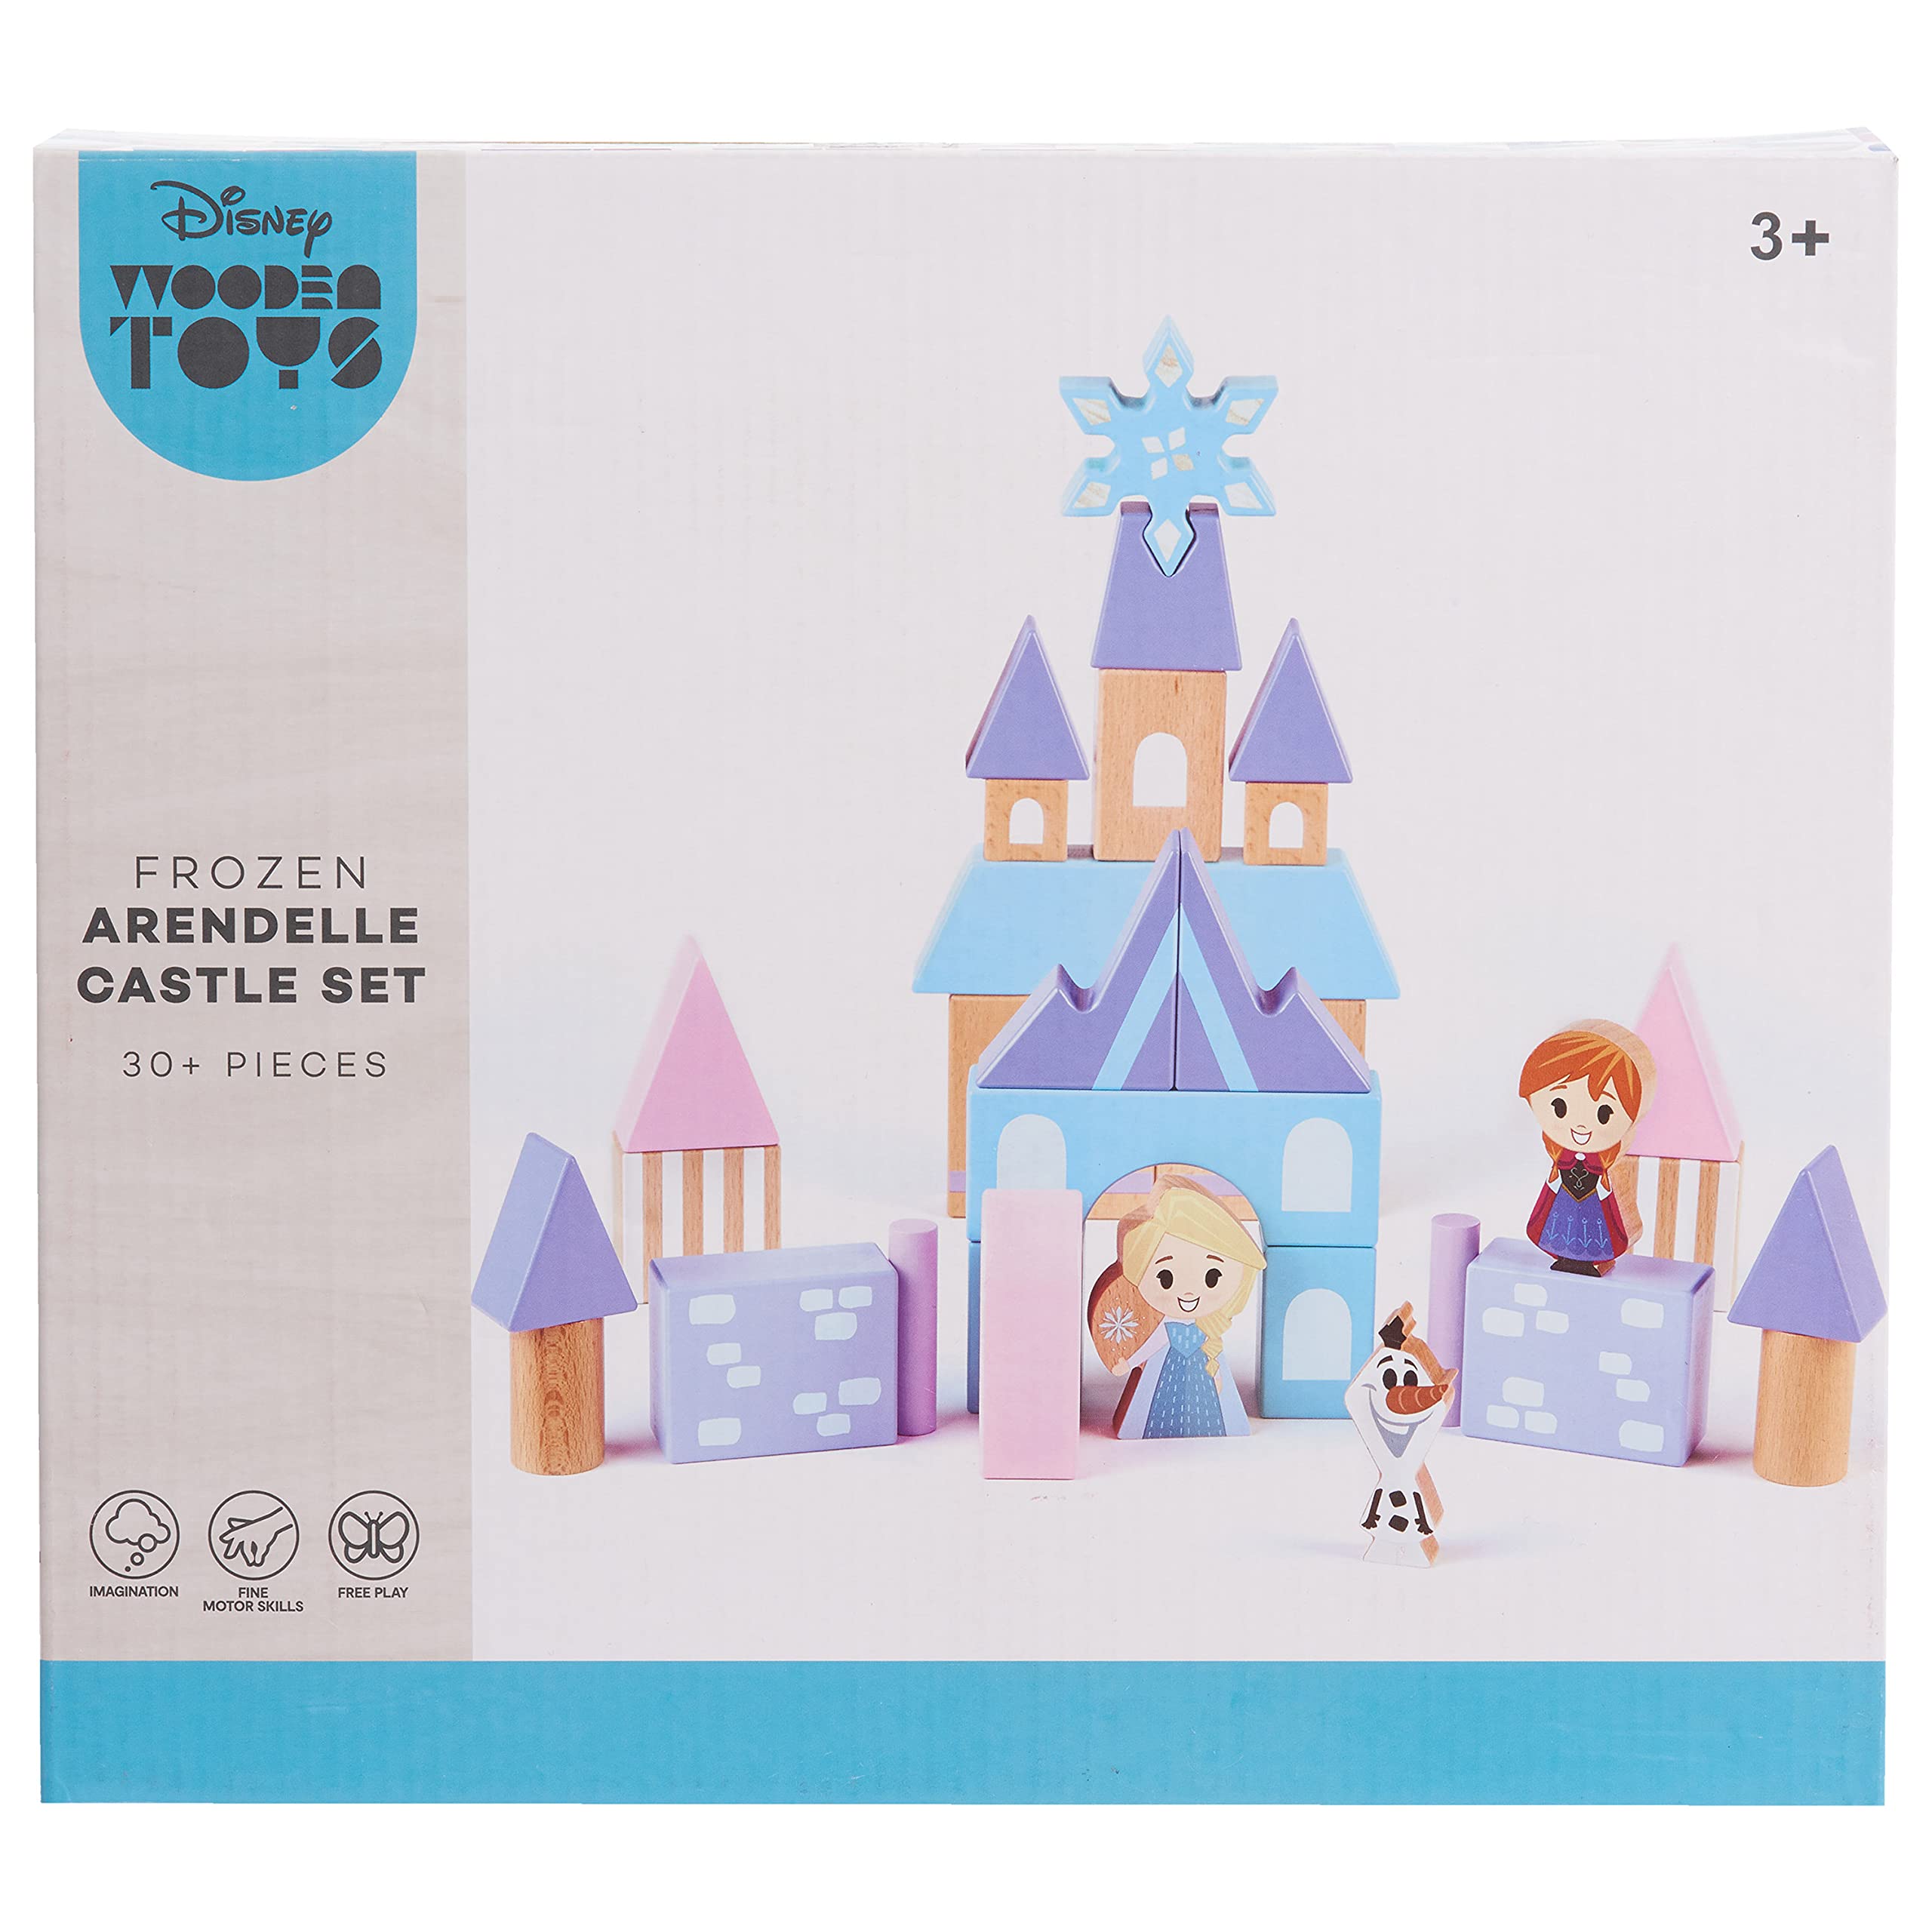 Disney Wooden Toys Frozen Arendelle Castle Block Set, 30+ Pieces Include Elsa, Anna, and Olaf Block Figures, Amazon Exclusive, by Just Play